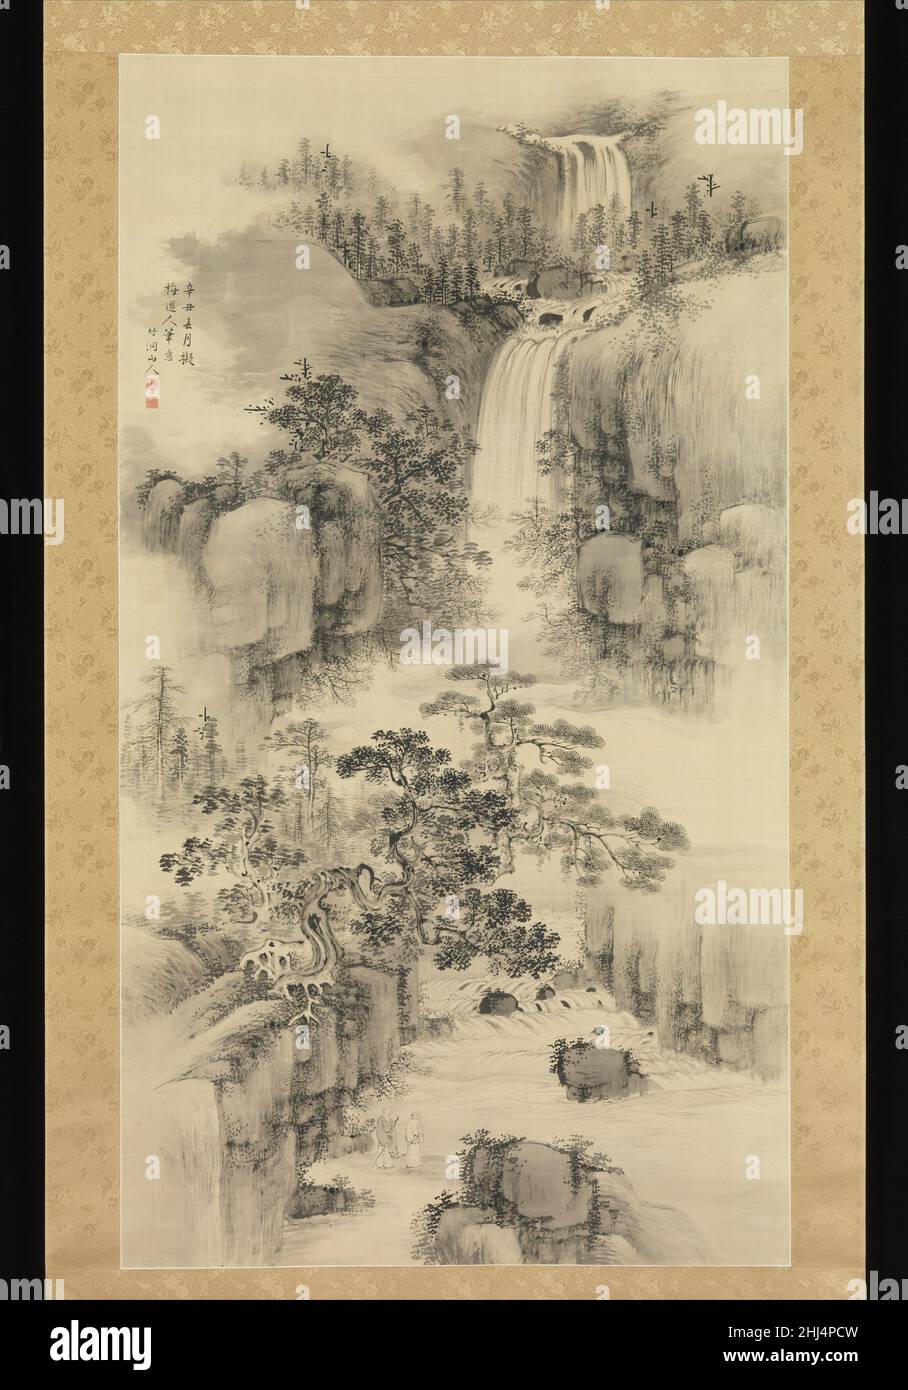 Landscape with Waterfall 1841 Nakabayashi Chikutō Japanese Chikutō painted this large landscape in the spirit of the Plum Blossom Daoist, the name given to the acclaimed Yuan-dynasty literati painter Wu Zhen (1280–1354). Chikutō’s diligent study of Chinese literati theory and technique, as expressed in printed treatises and manuals on painting, is evident here, particularly in his masterful rendering of the rocks using a combination of long, unaccented brushstrokes in pale, dry ink and staccato accents. Together with the darker horizontals of the distant pines and foliage, such brushwork deriv Stock Photo